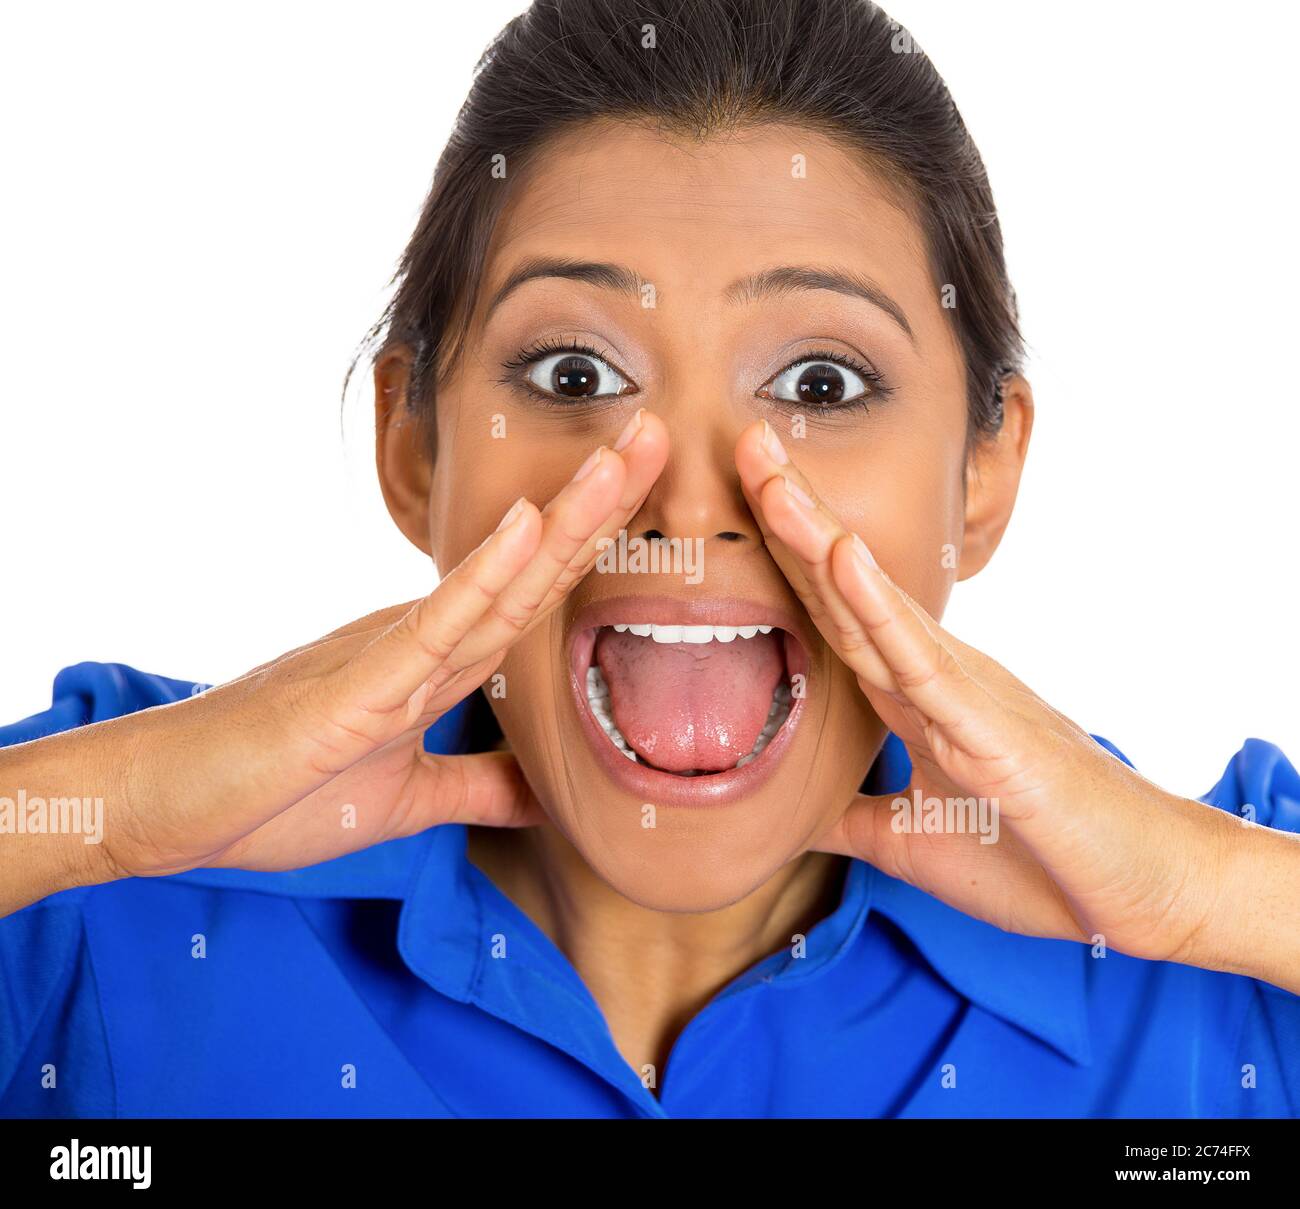 Portrait of a displeased angry, cranky, grumpy, woman screaming isolated on white background. Stock Photo